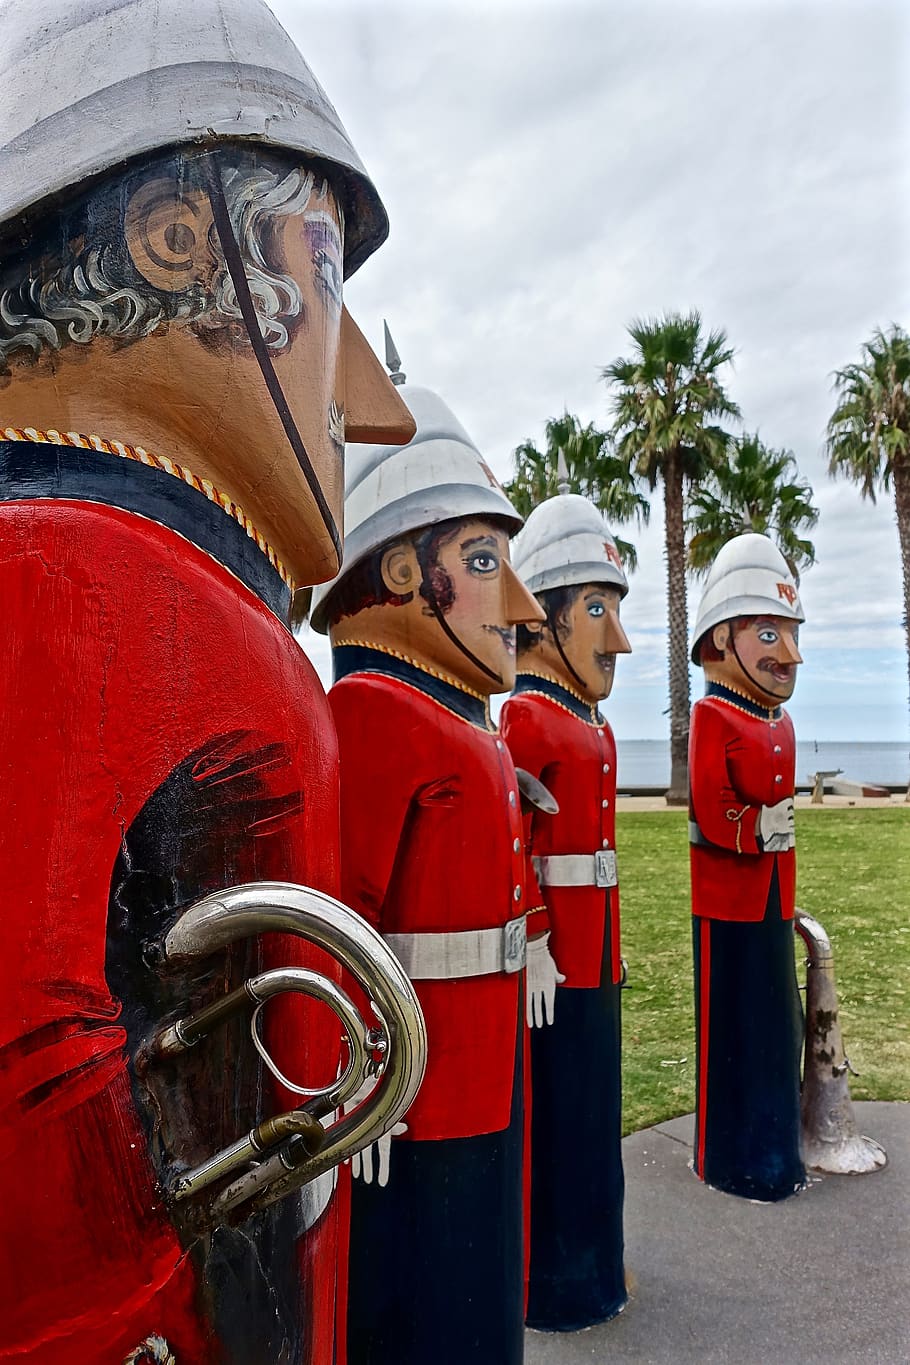 statues, musicians, brass band, totem poles, figures, military, sculpture, red, day, representation